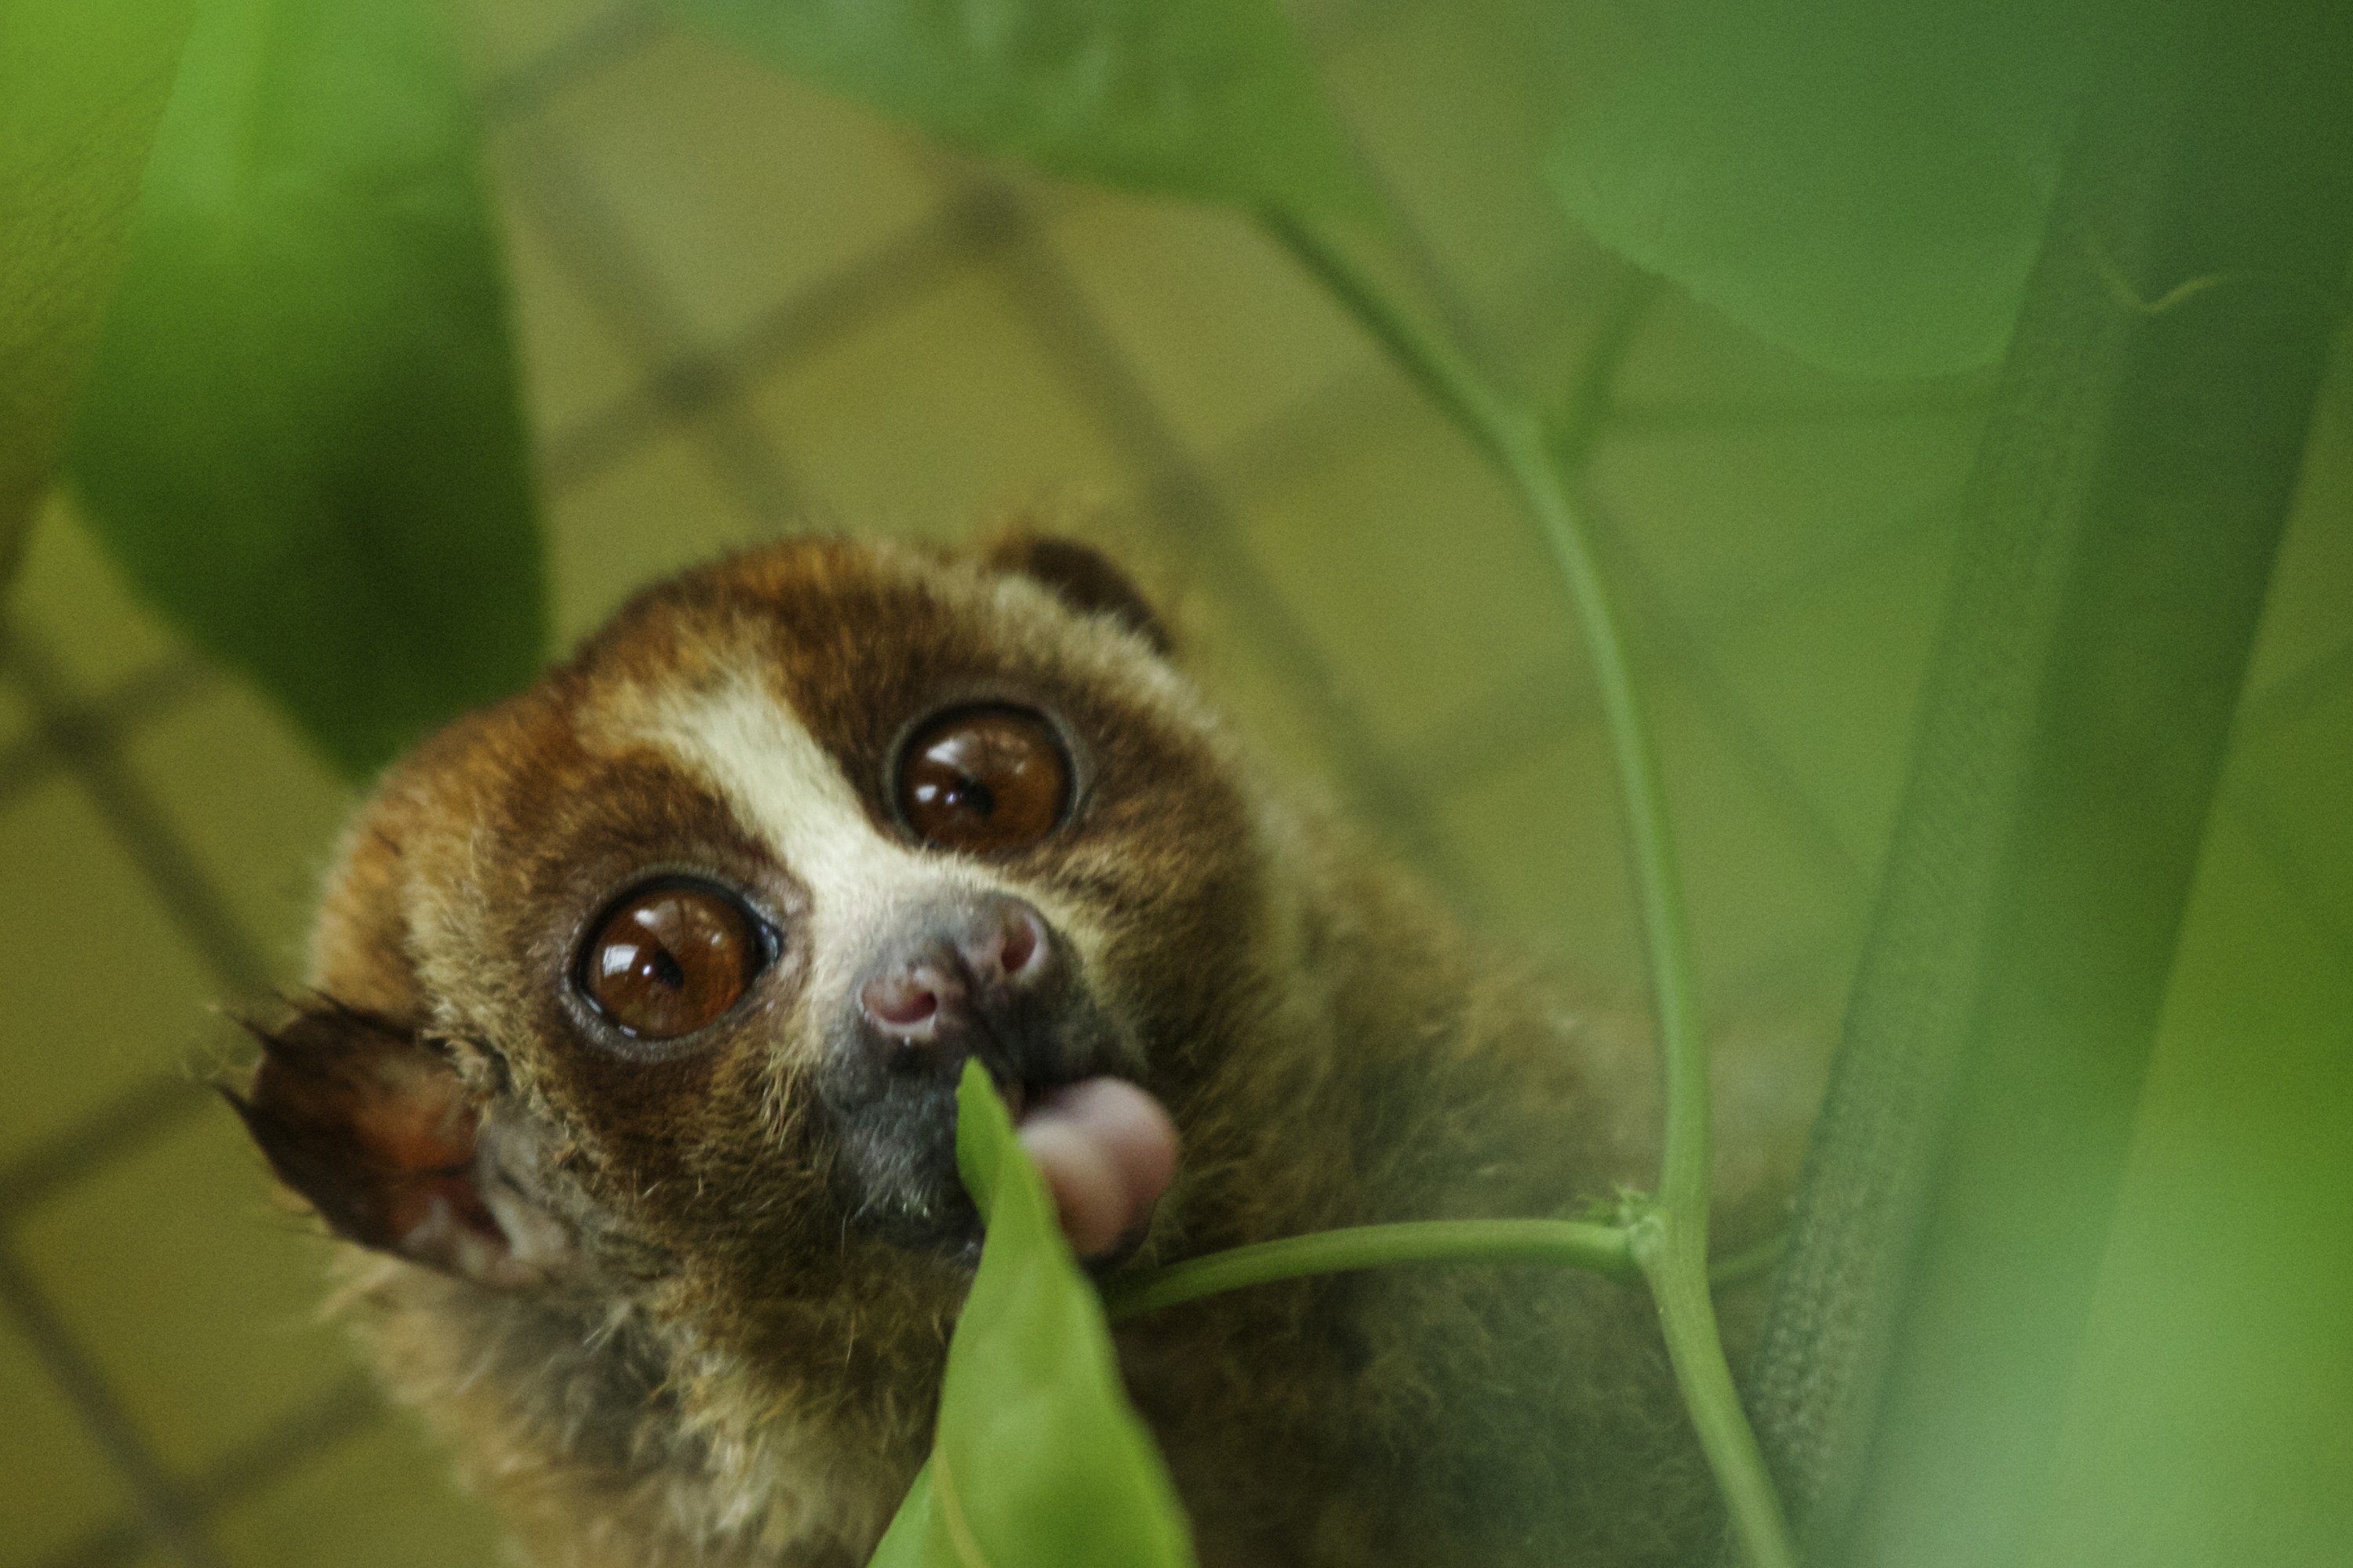 A slow loris in its cage at a sanctuary for the endangered animals, which have been confiscated from individuals or markets that illegally sell them as pets, on February 27, 2014 in Bogor, Indonesia. (Ed Wray—Getty Images)